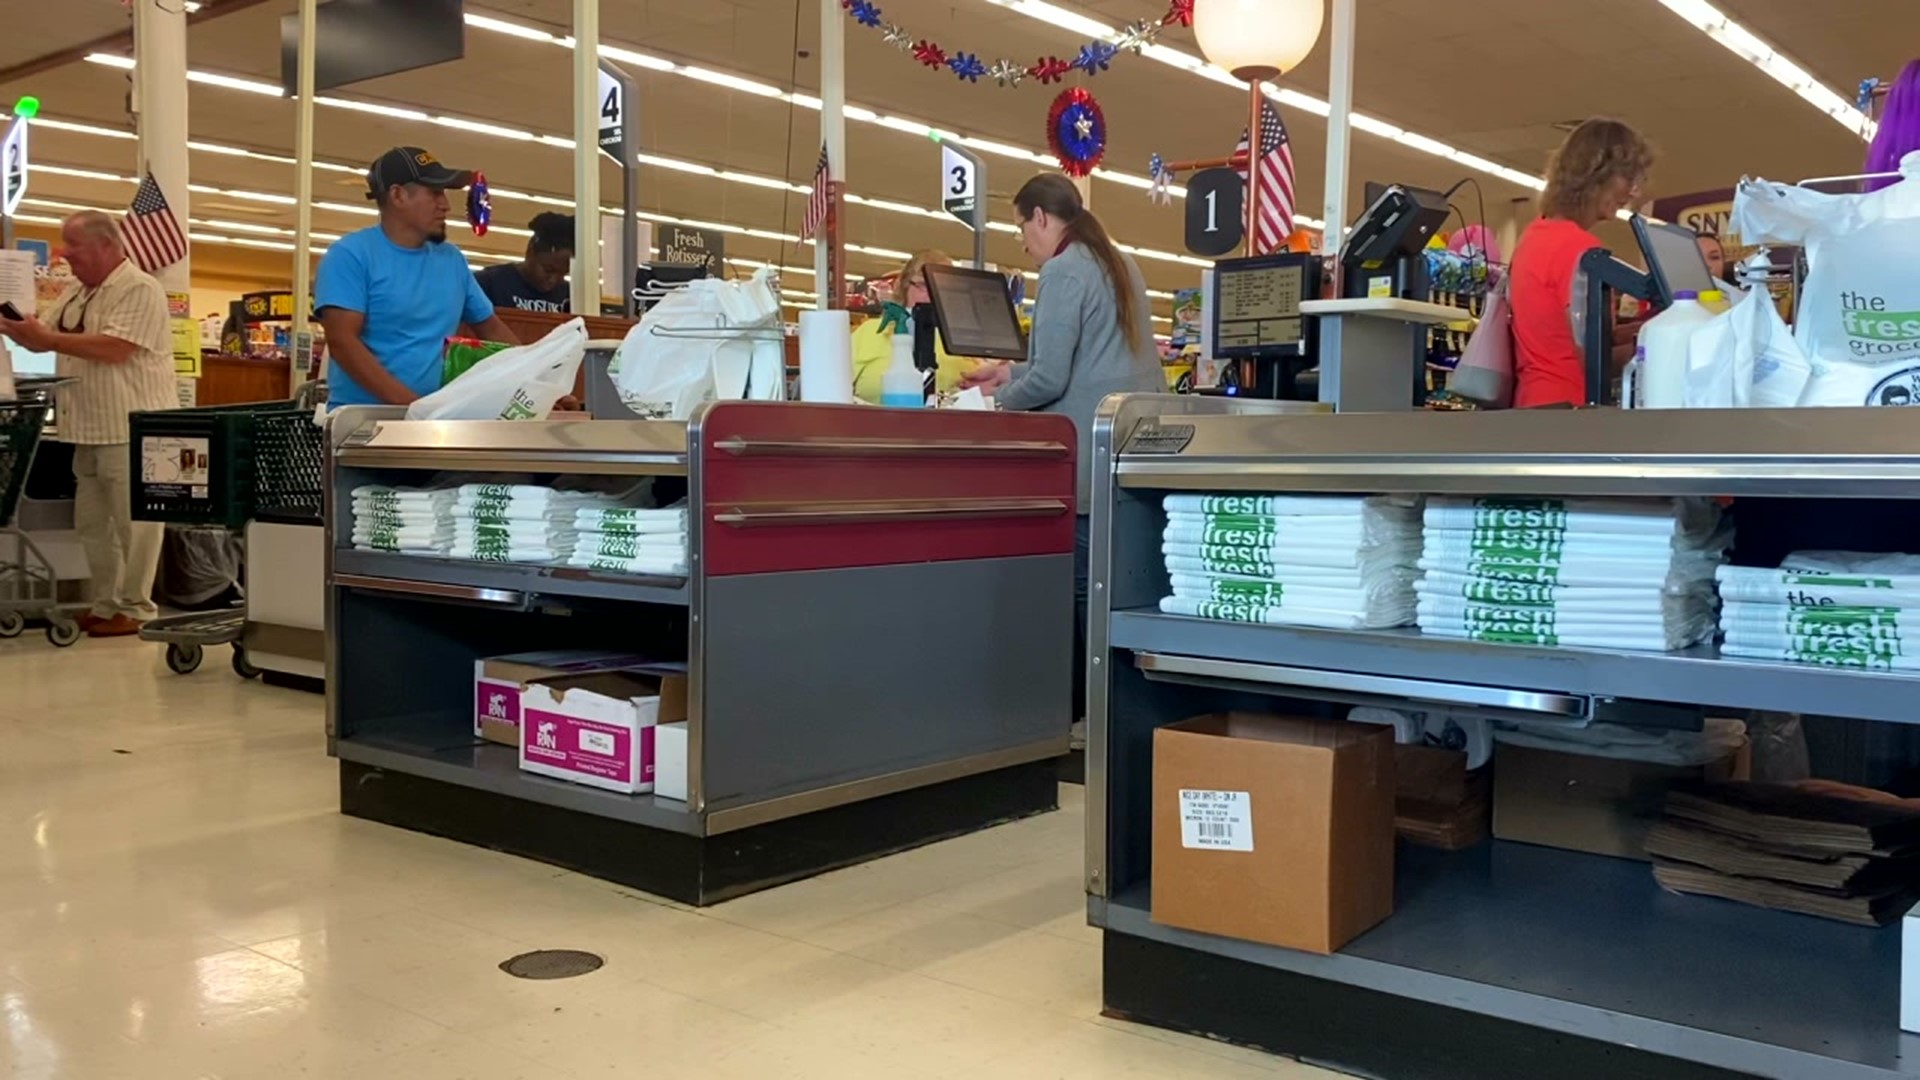 At Gerrity's in Wyoming, shoppers were getting everything they need for their Fourth of July feasts.